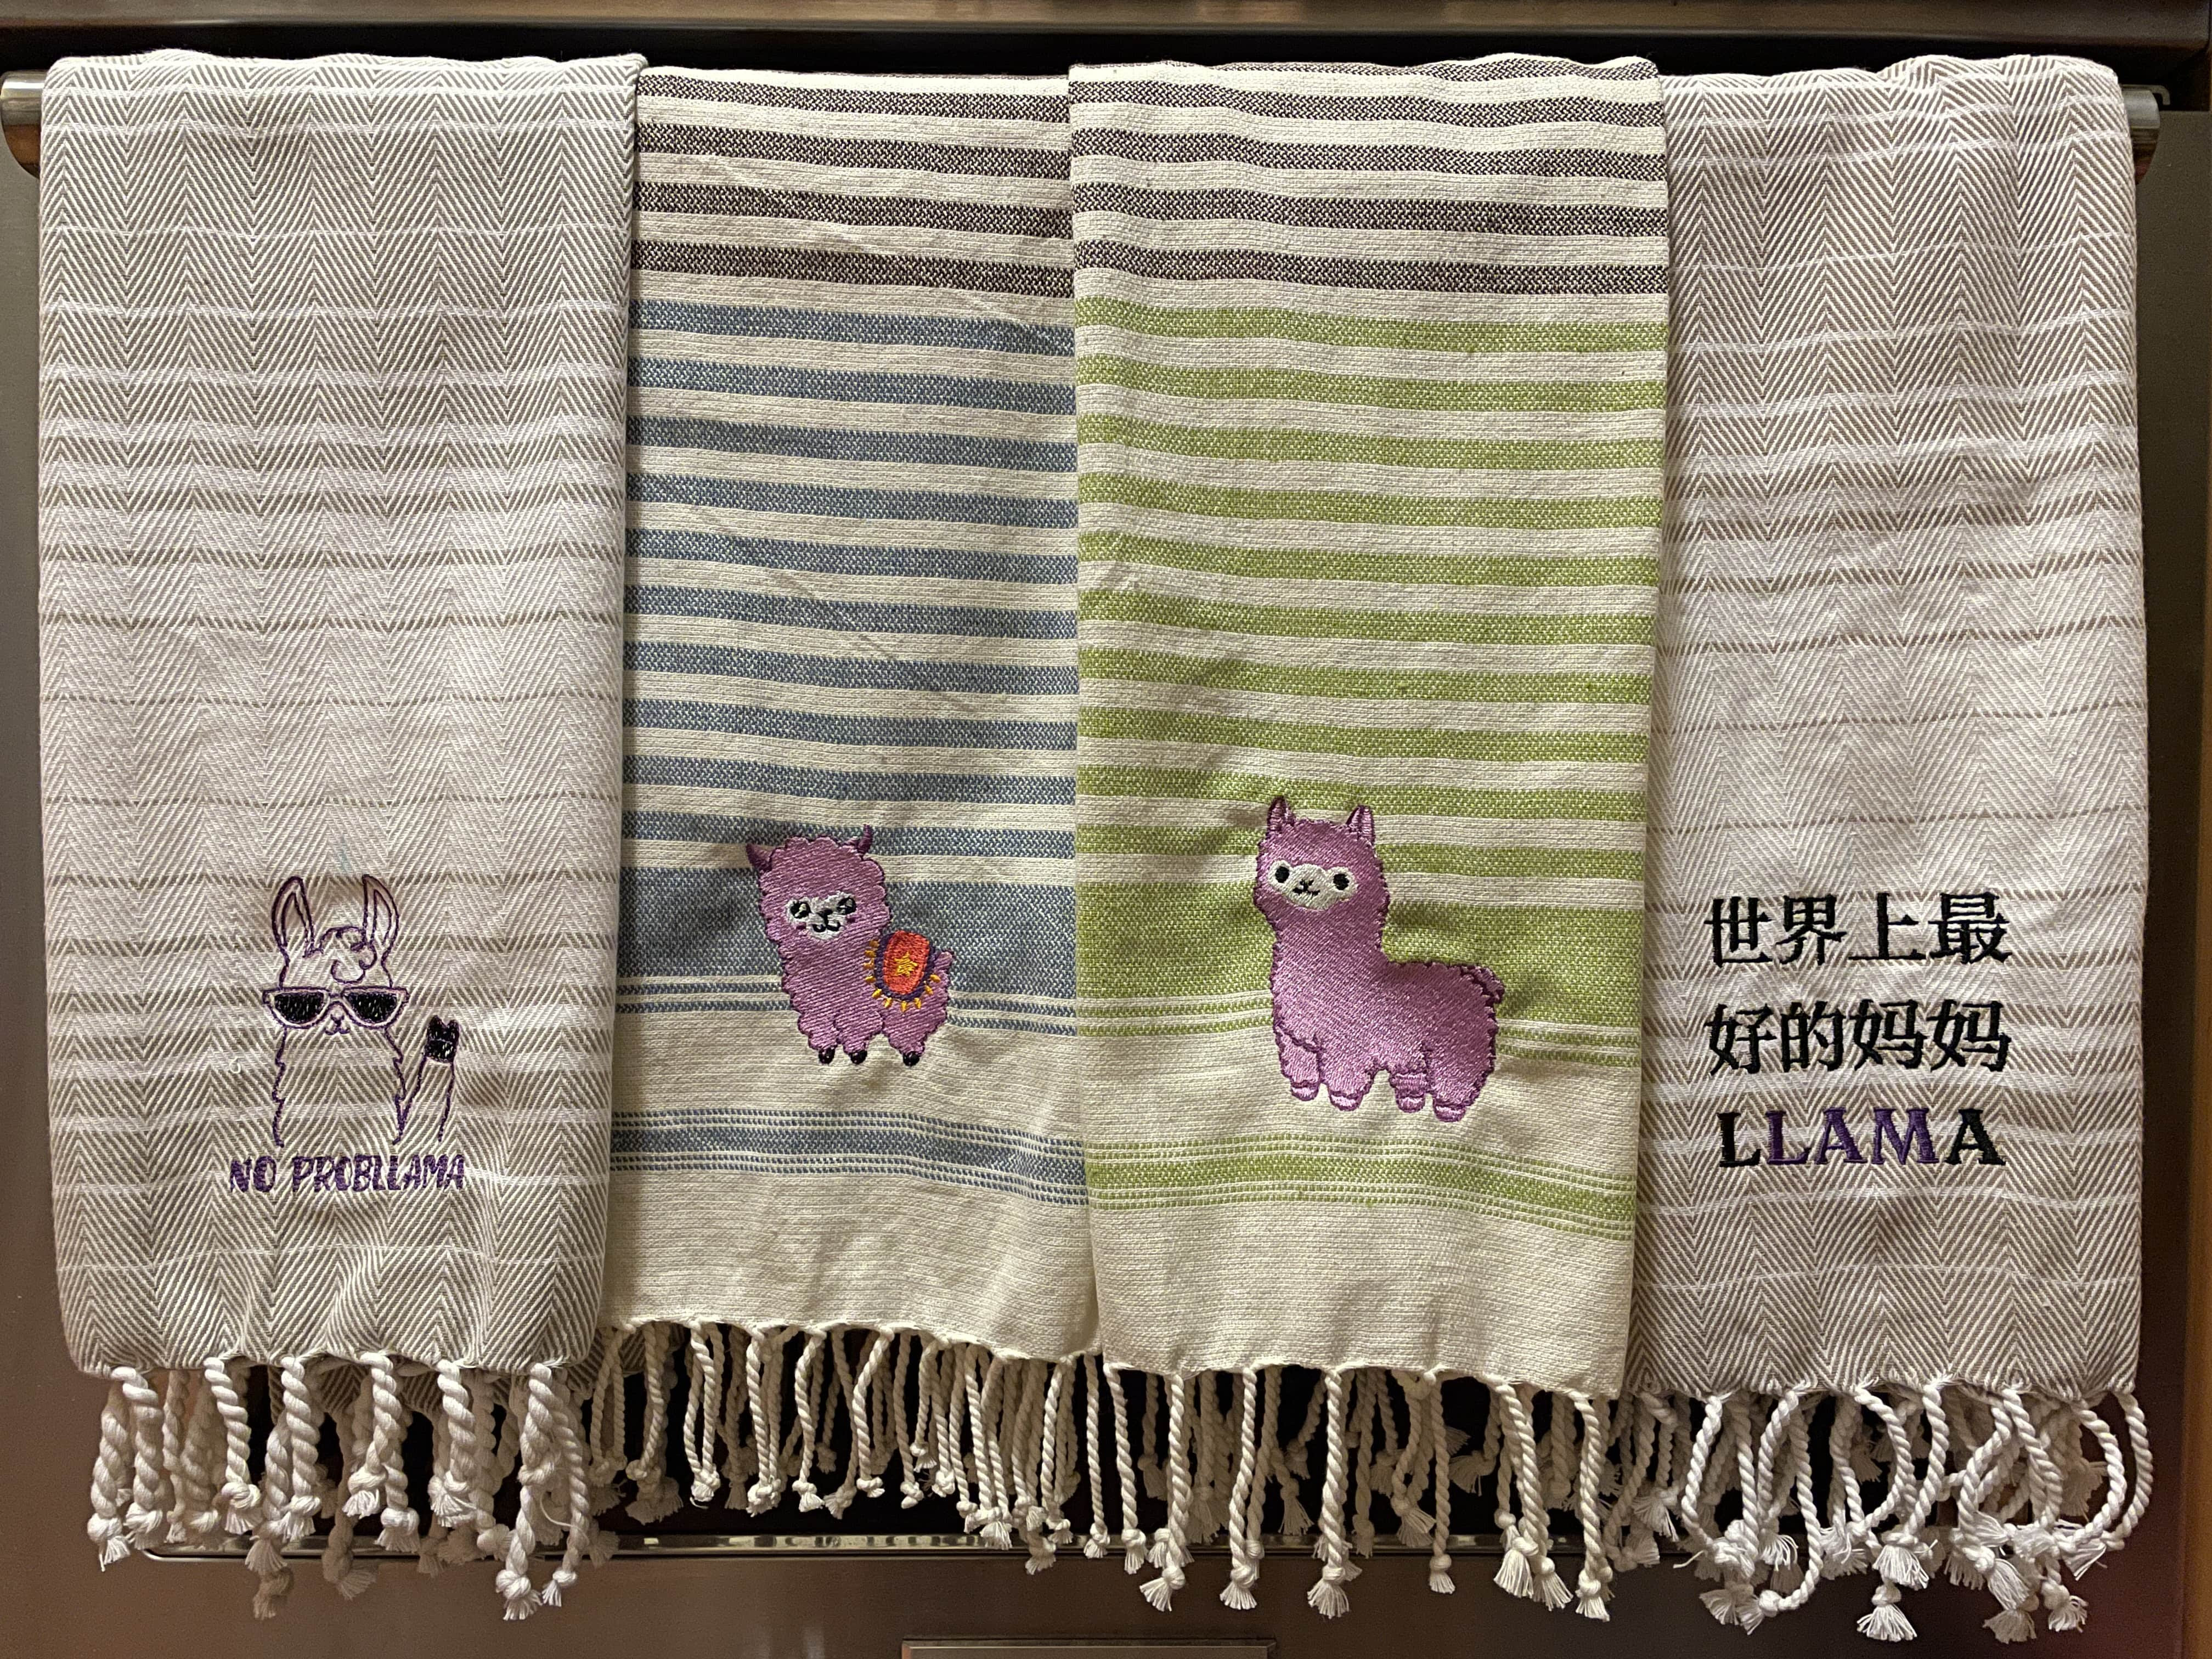 Four kitchen towels that are embroidered